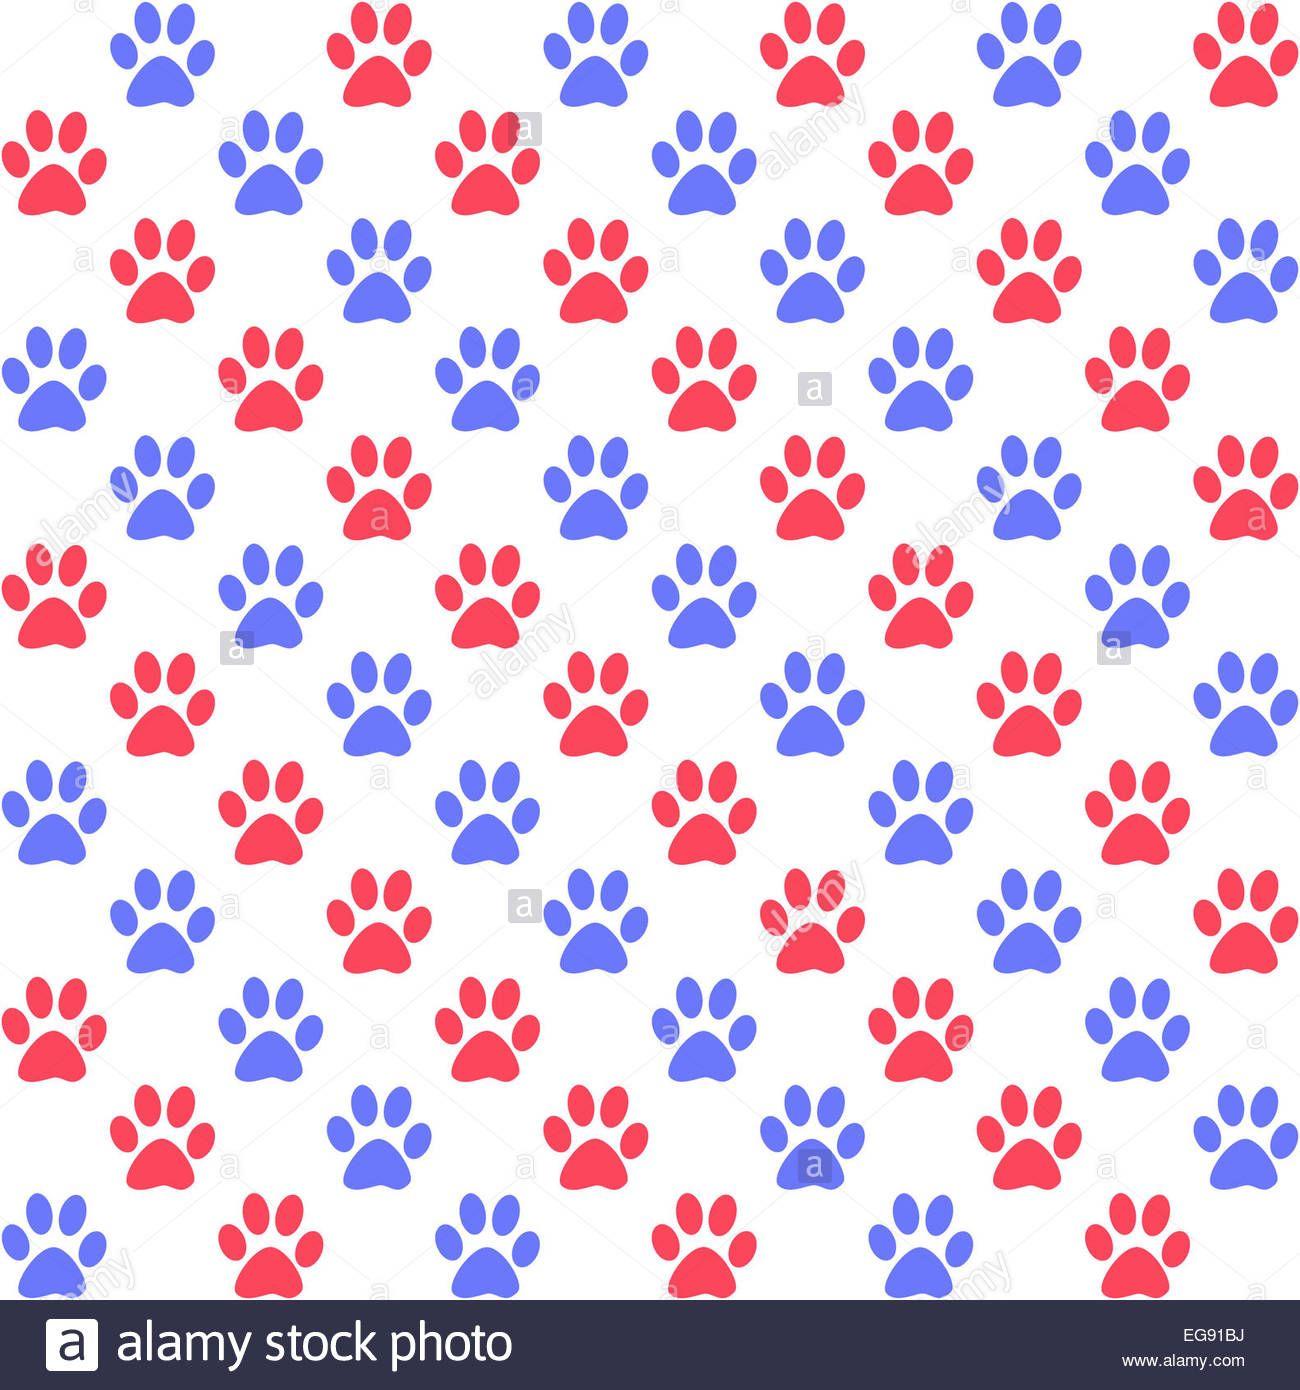 Blue Red Paw Logo - Paw Prints In Red And Blue On White A Seamless Background Pattern